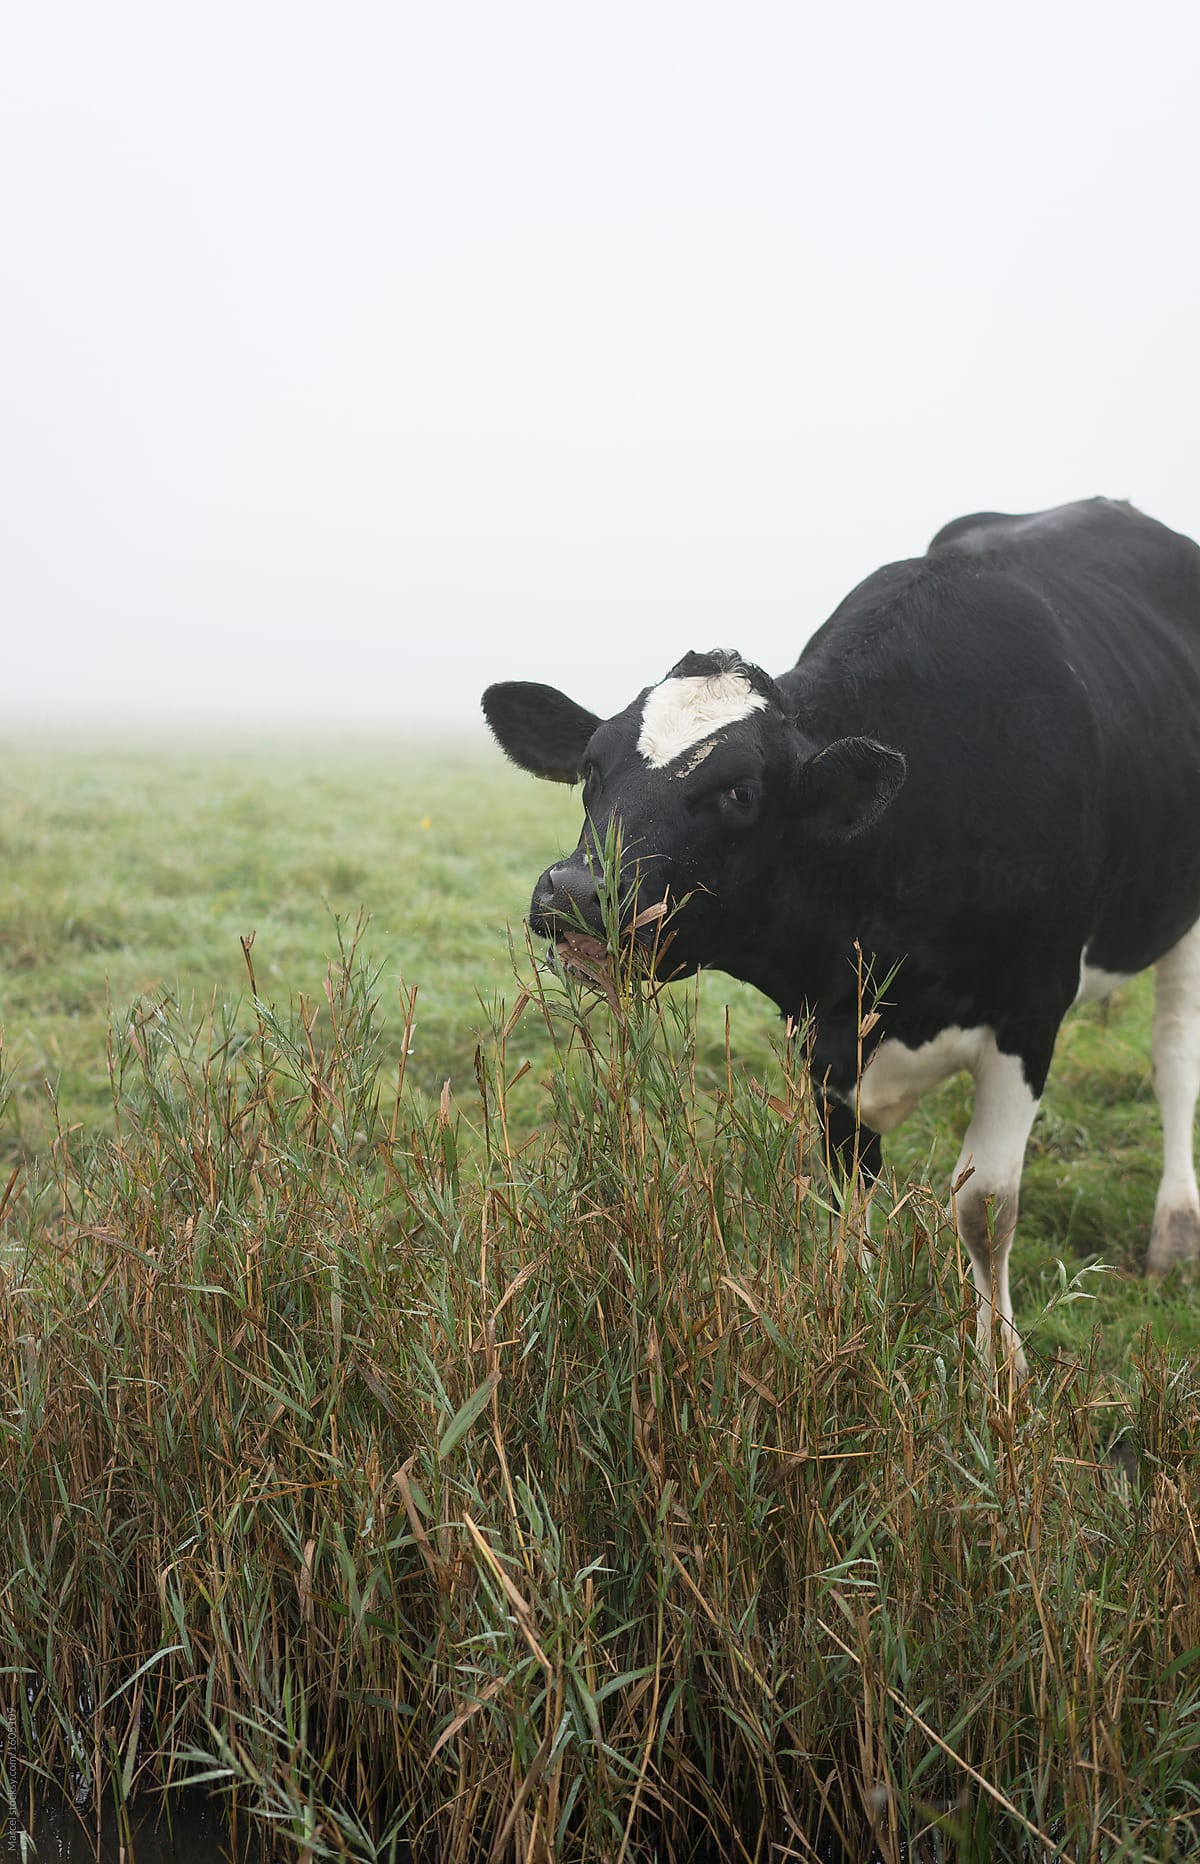 Cow eating reeds in a field on a misty morning